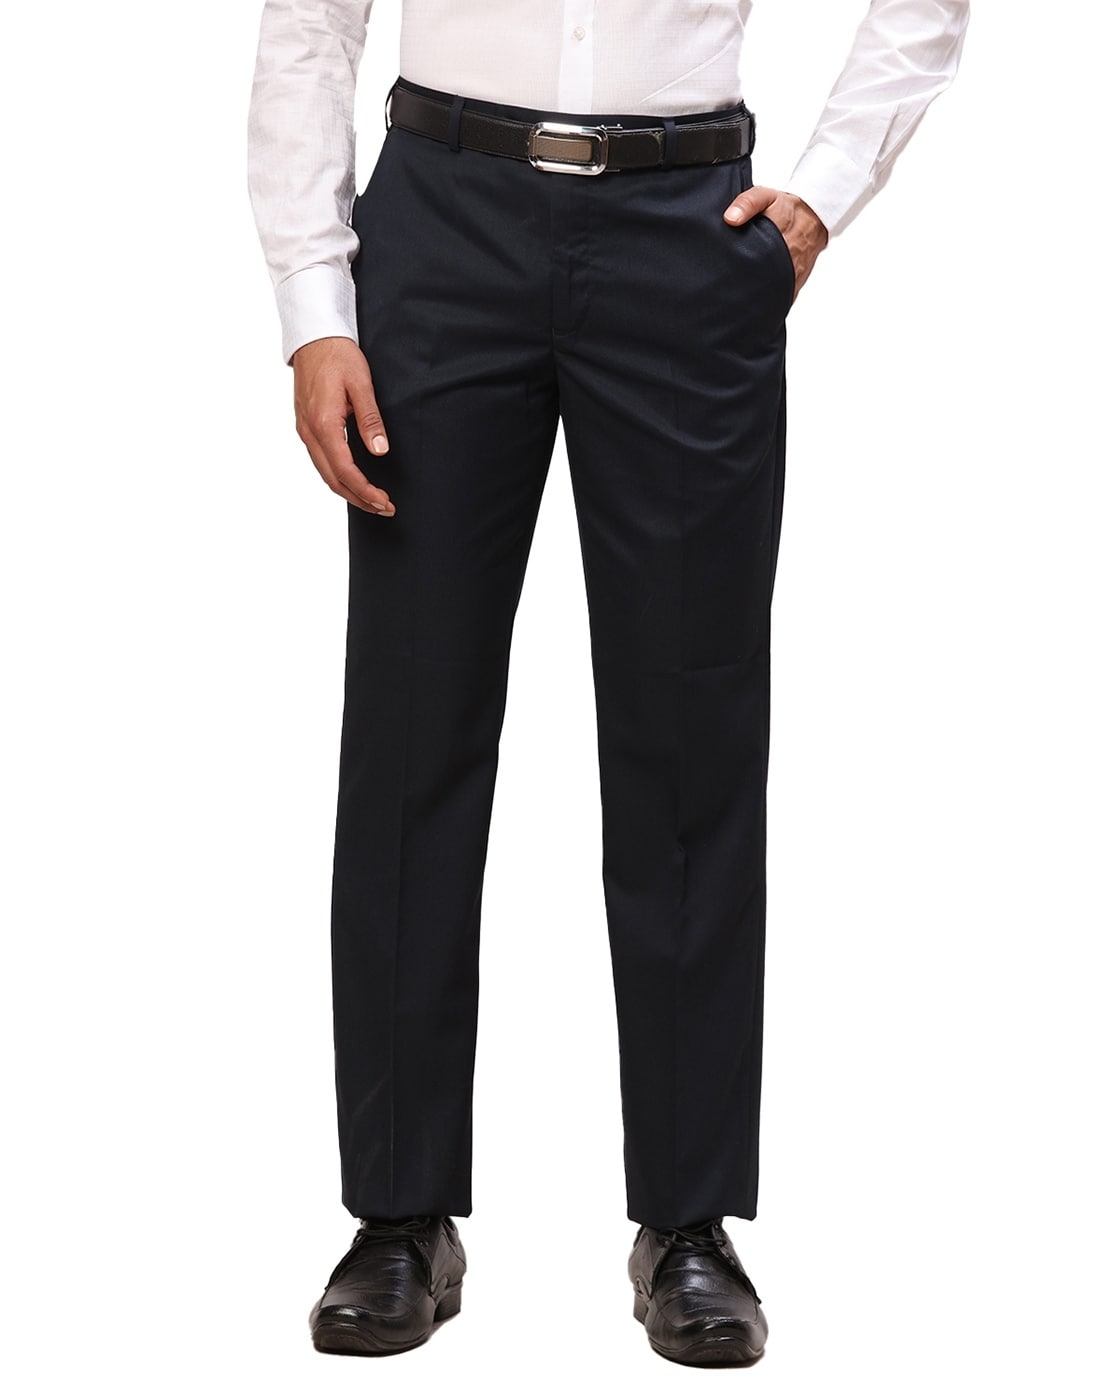 Curvature Formal Wear Regular Fit Cotton Mens Trousers Made In India Waist  Size 28 To 38 at Best Price in Kolkata  Kaaparsik International